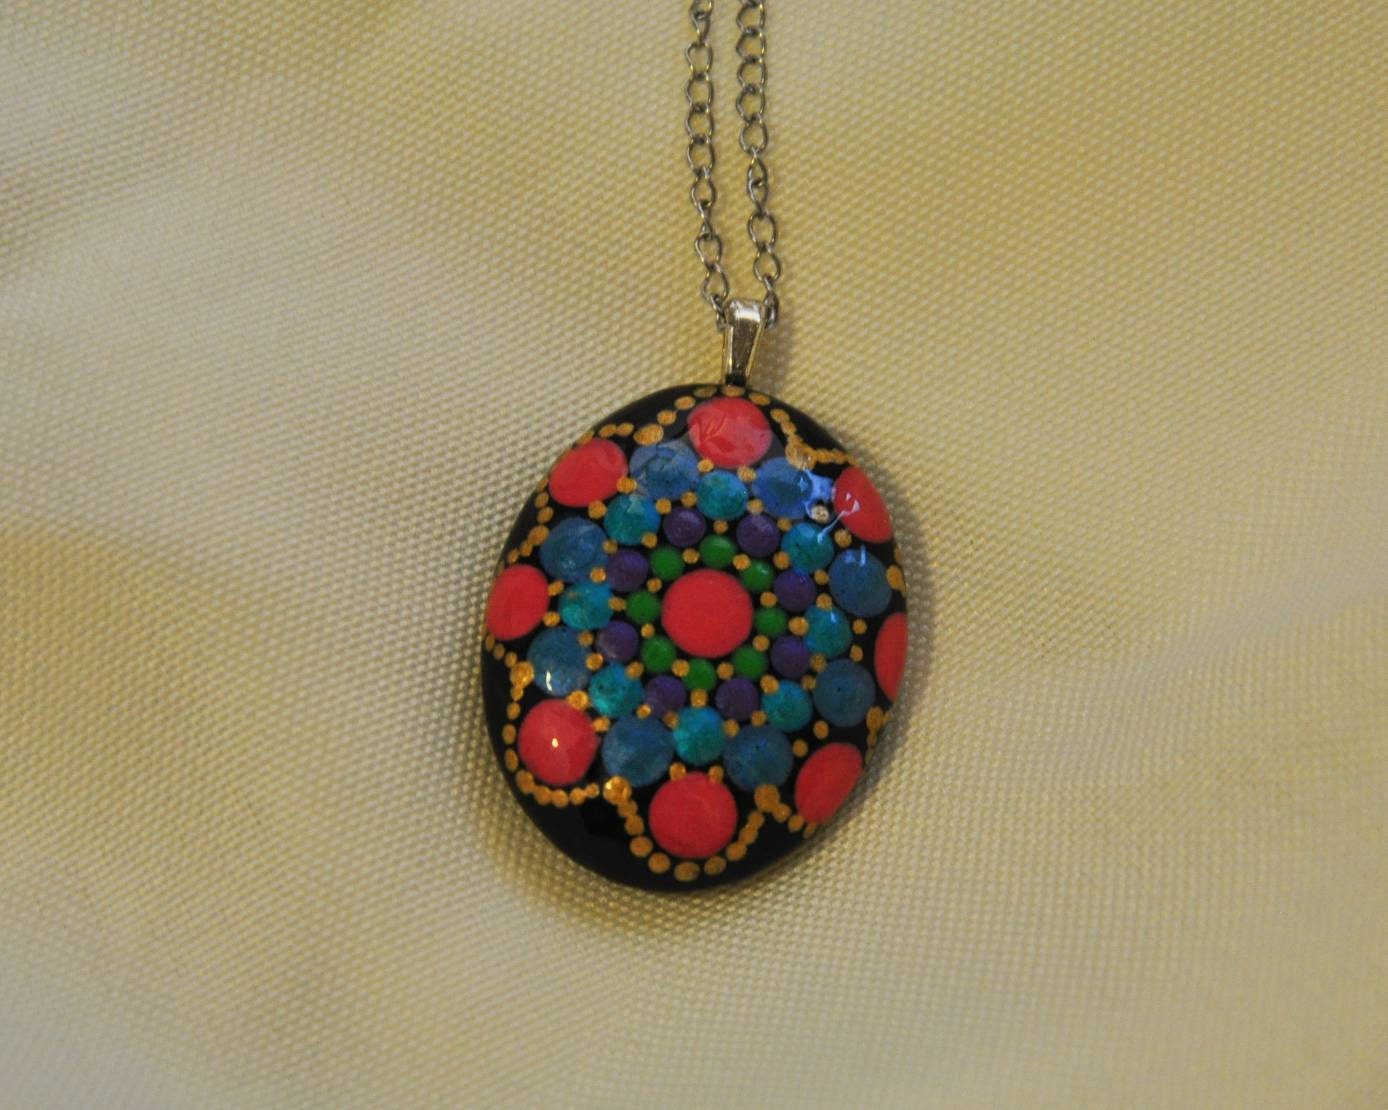 Handpainted Pearlescent Dot Mandala Necklace, Stone Pendant, Sealed w/ Resin, Hypoallergenic Stainless Steel Chain, Lobster Claw Closure